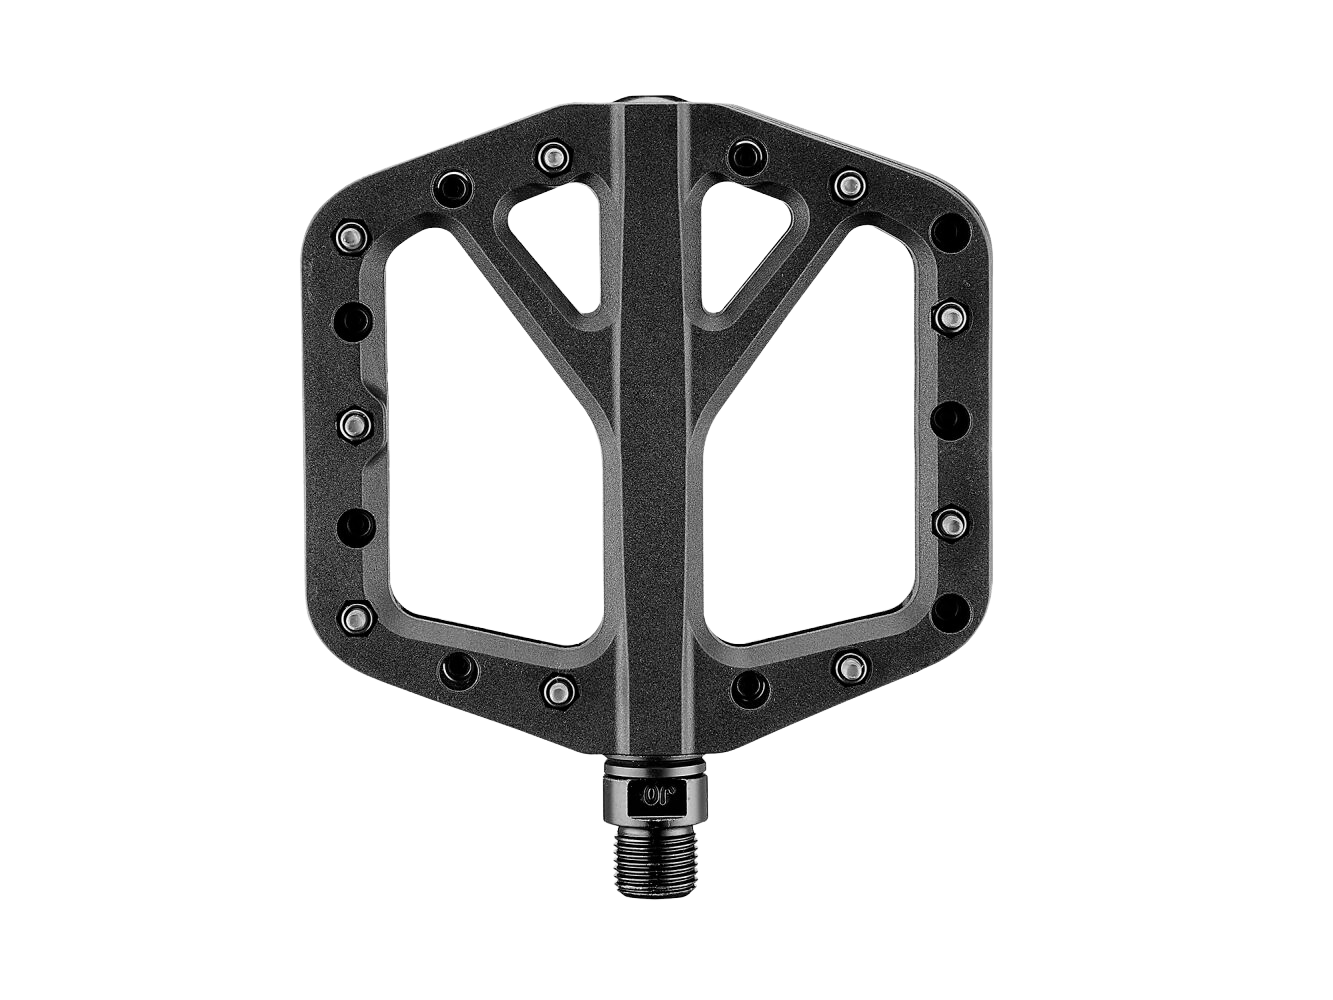 Giant Pinner Elite Pedals